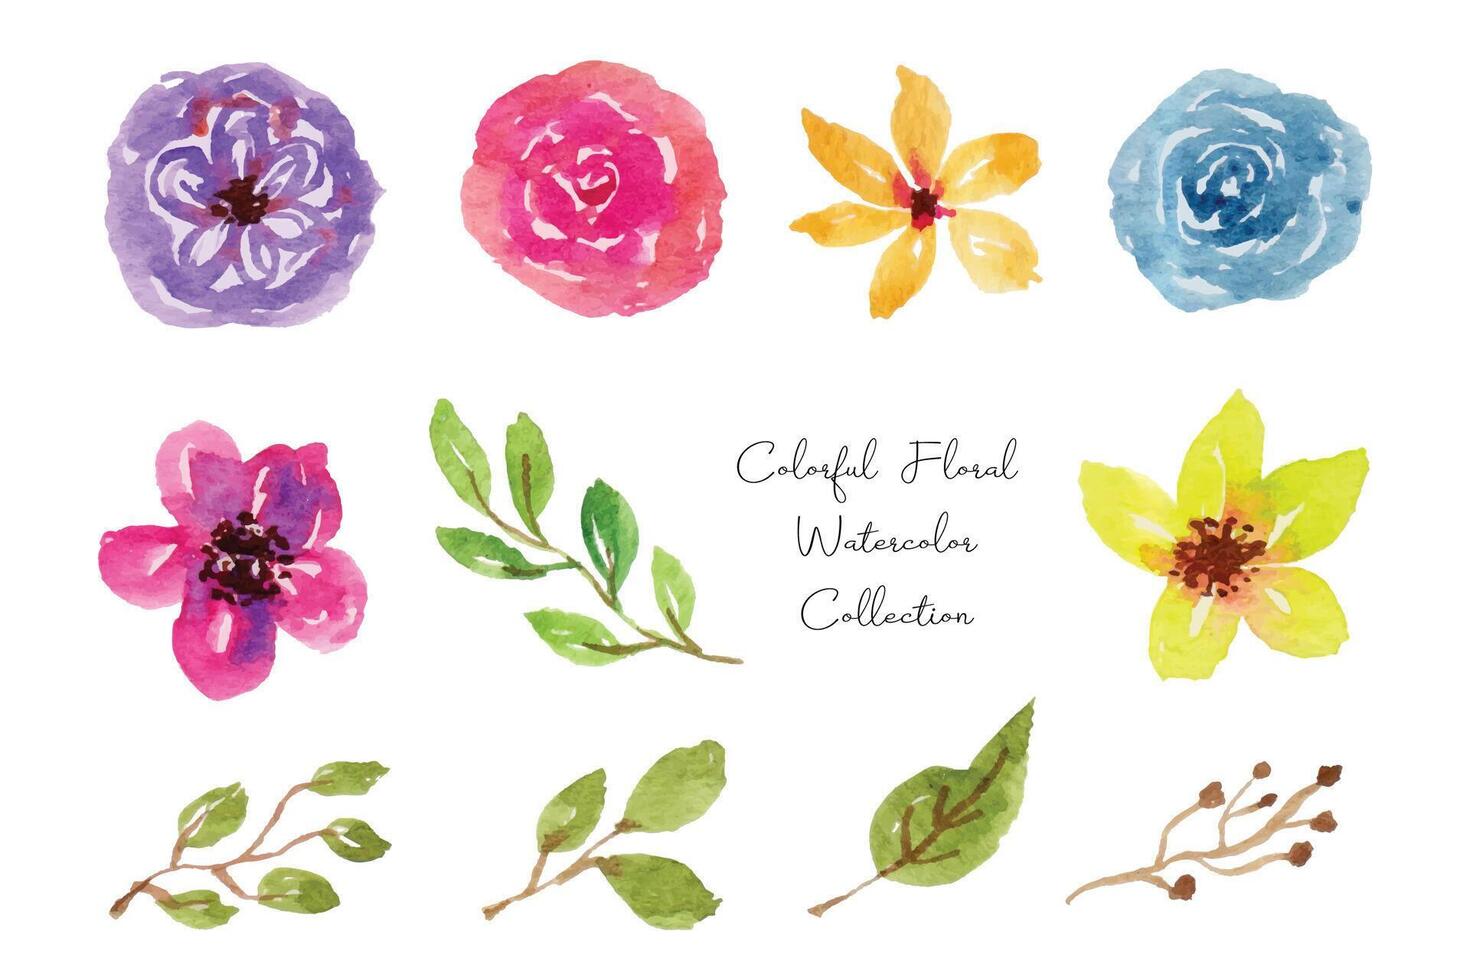 Colorful Flower and Leaf Watercolor Collection vector